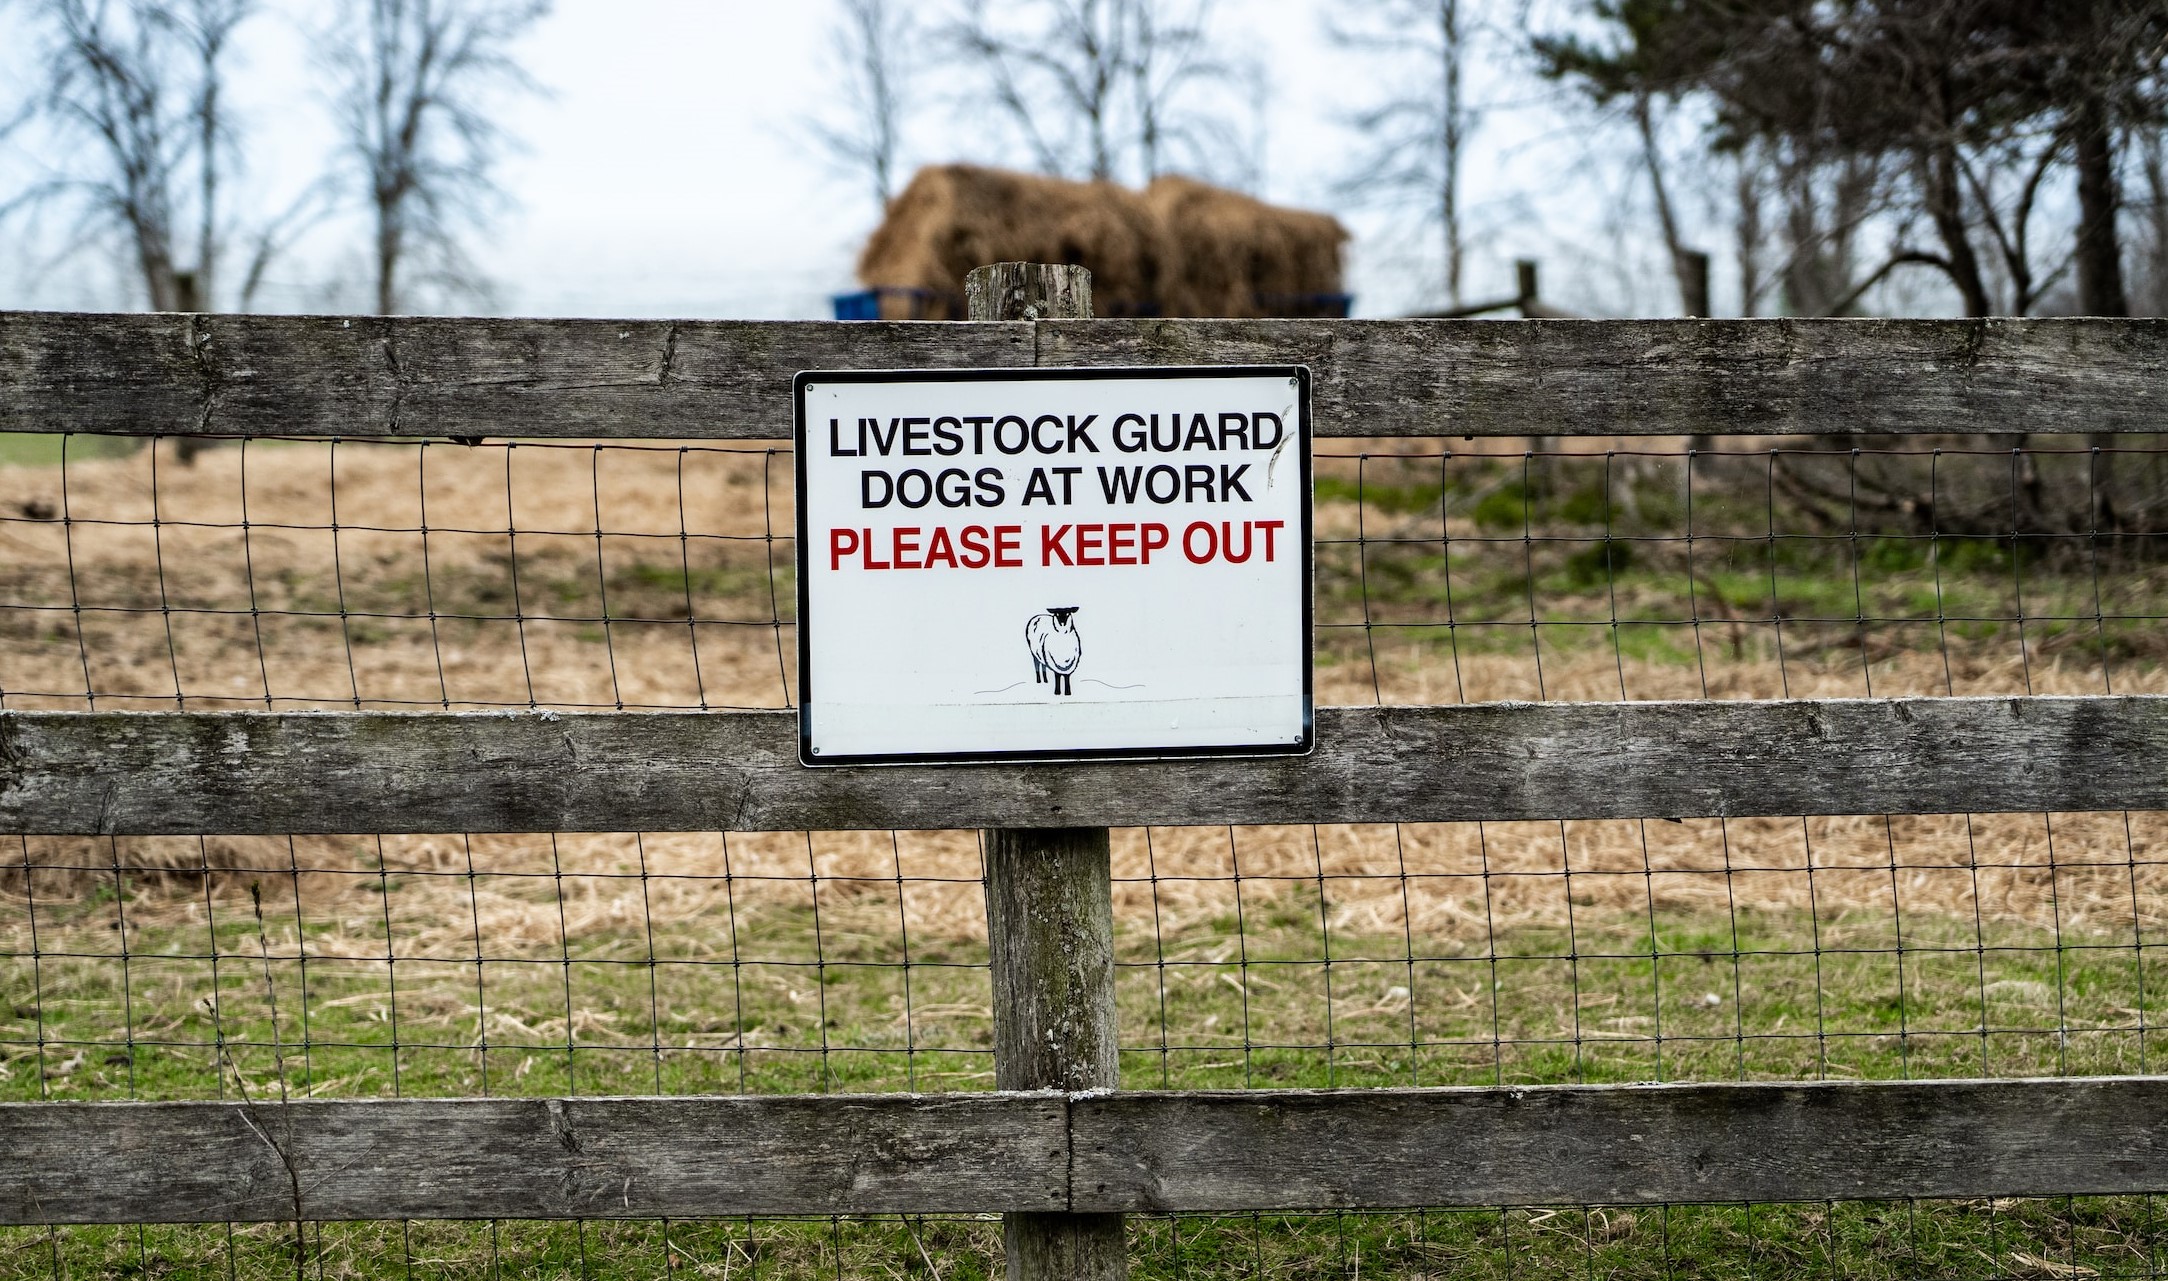 A guard dog sign protecting the livestock of a farm